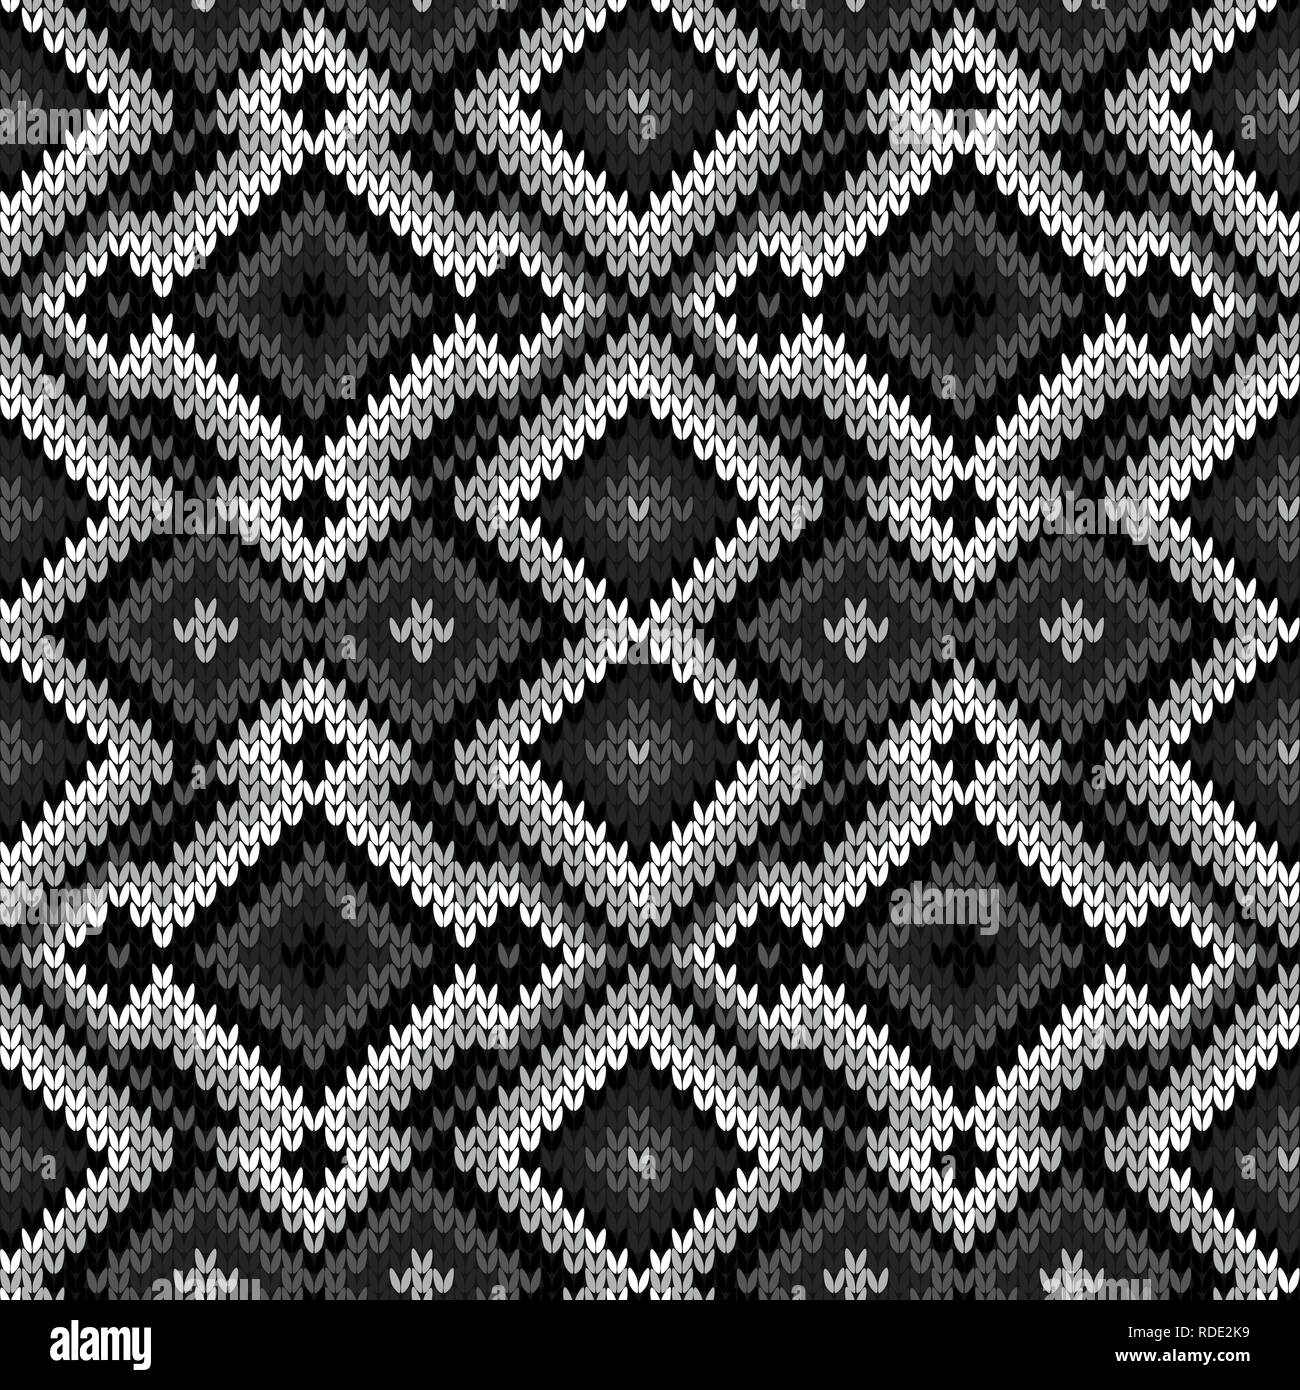 Knitted seamless ornate pattern with interlacing lines in monochrome hues vector as a fabric texture Stock Vector